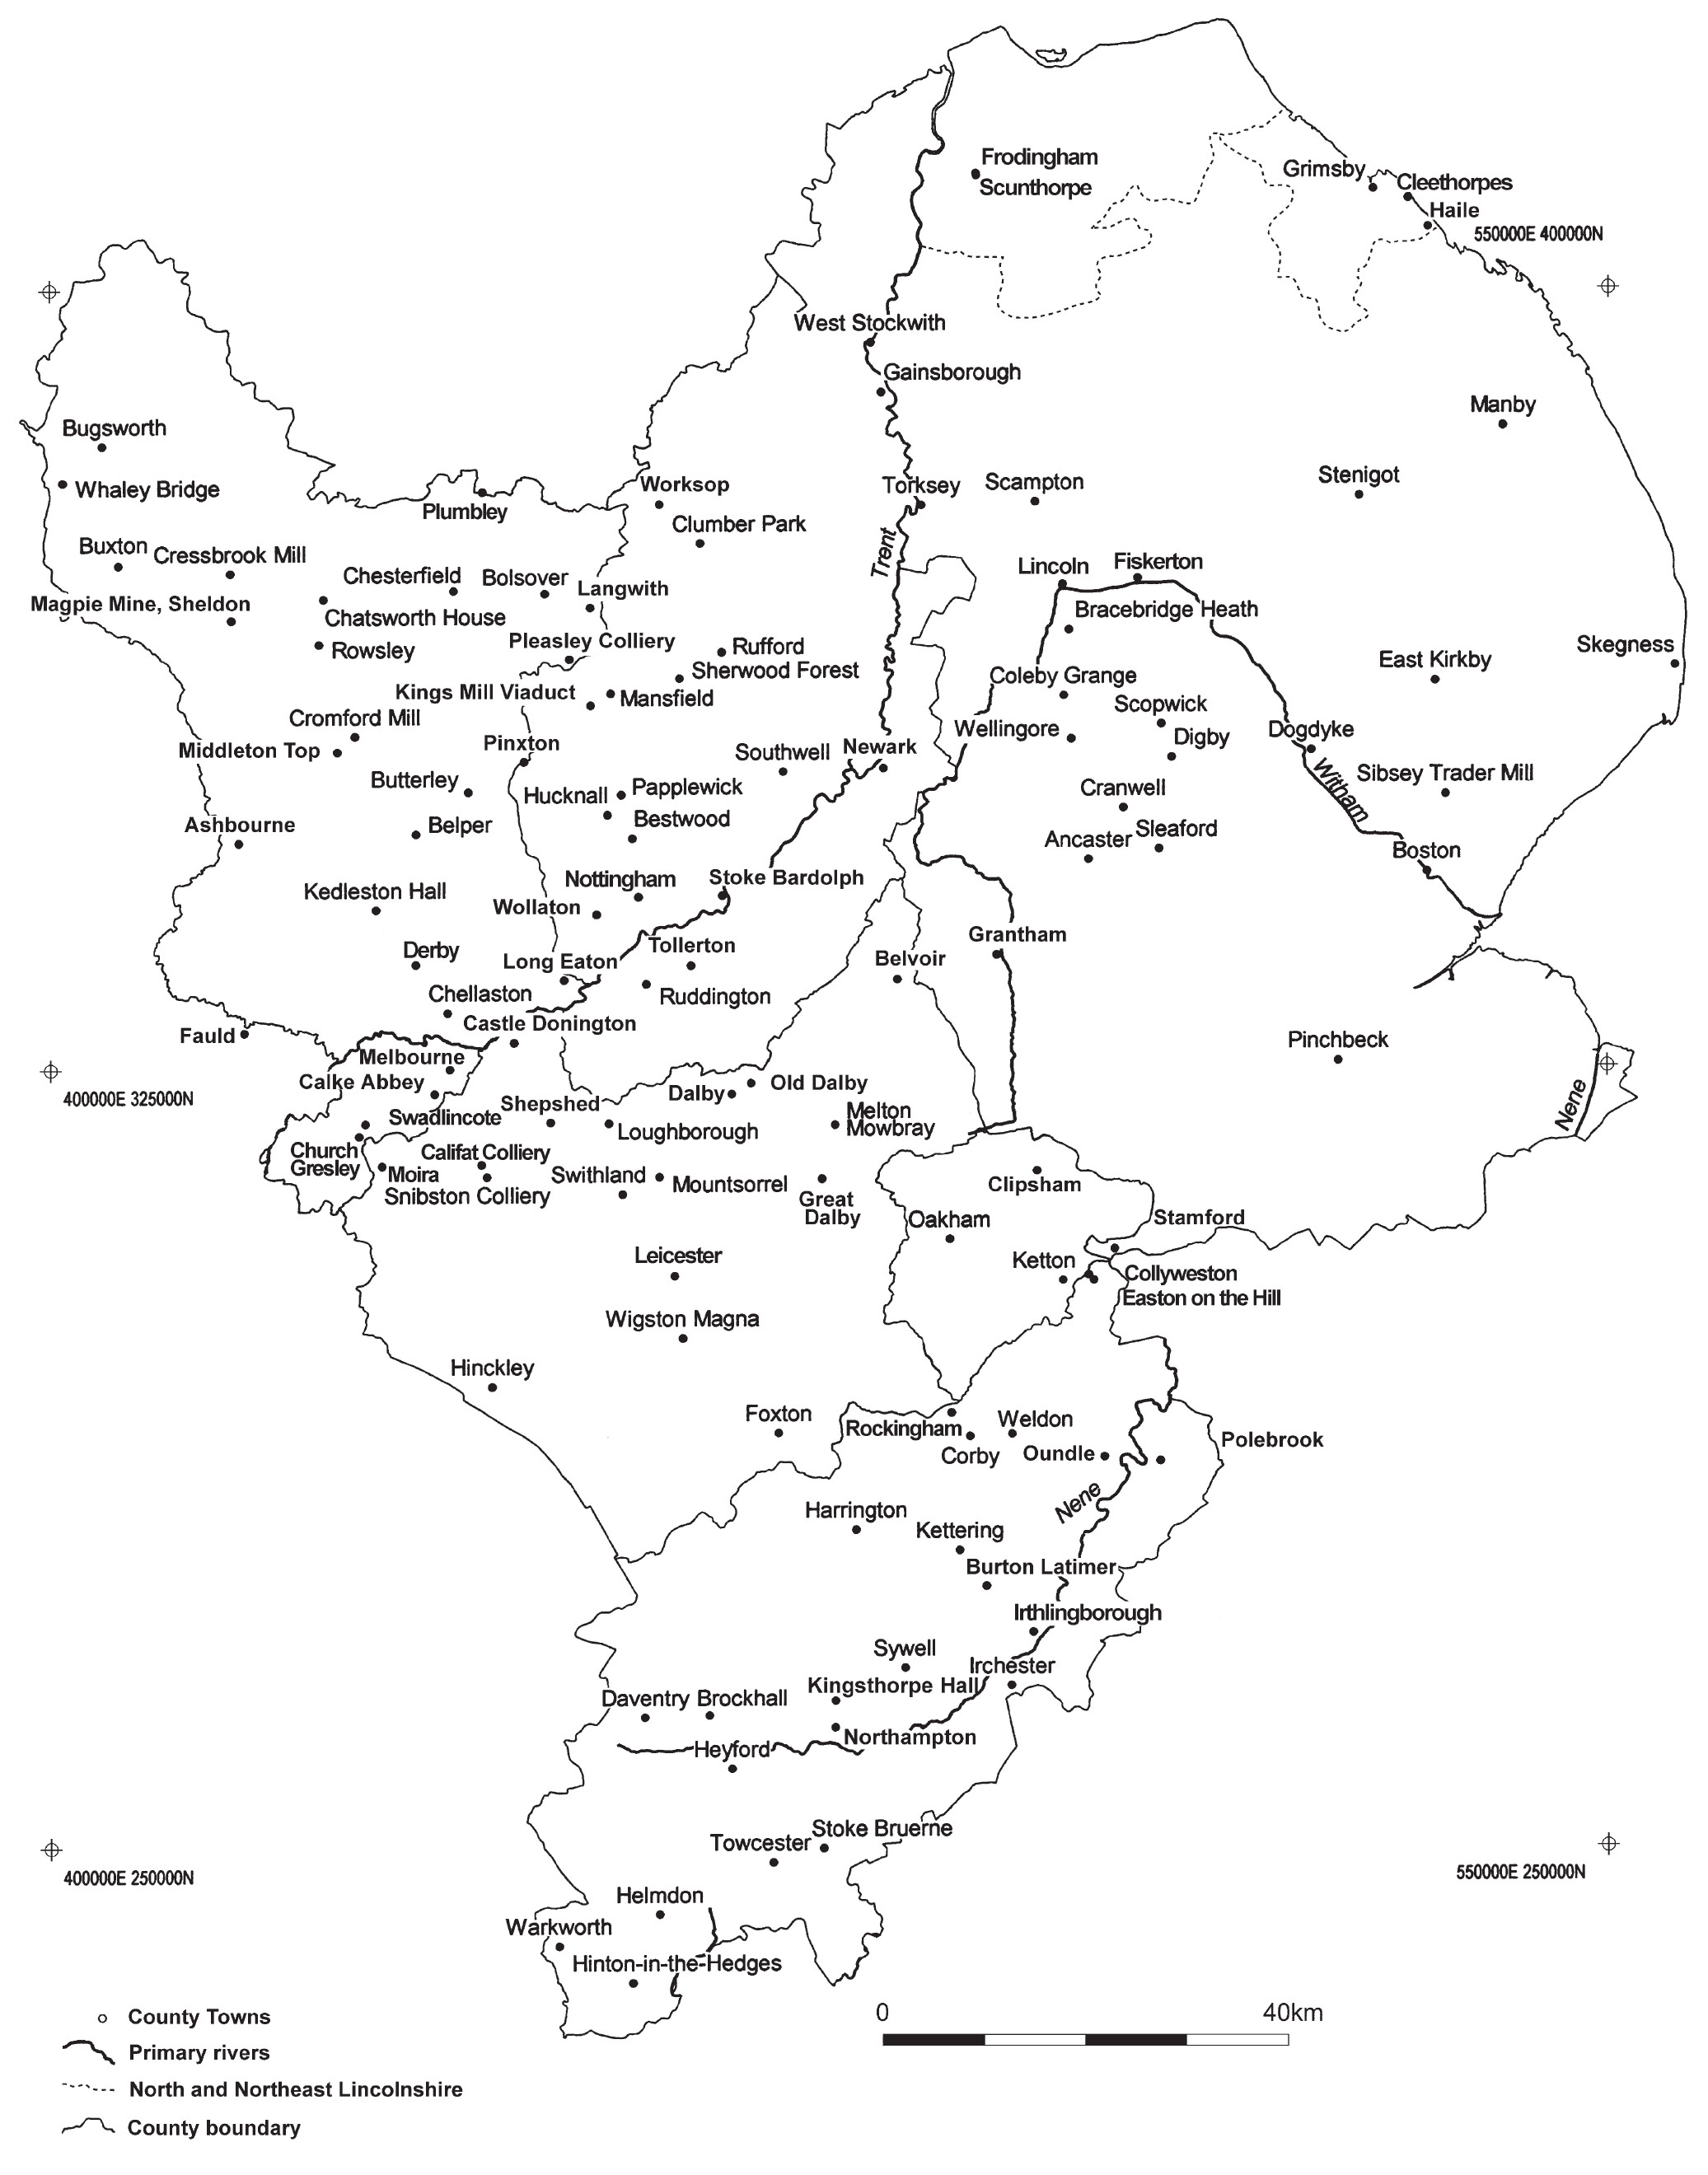 A map of the Midlands showing the distribution of sites. Sites can be seen in all regions, but the greatest concentration is in the west and north west.